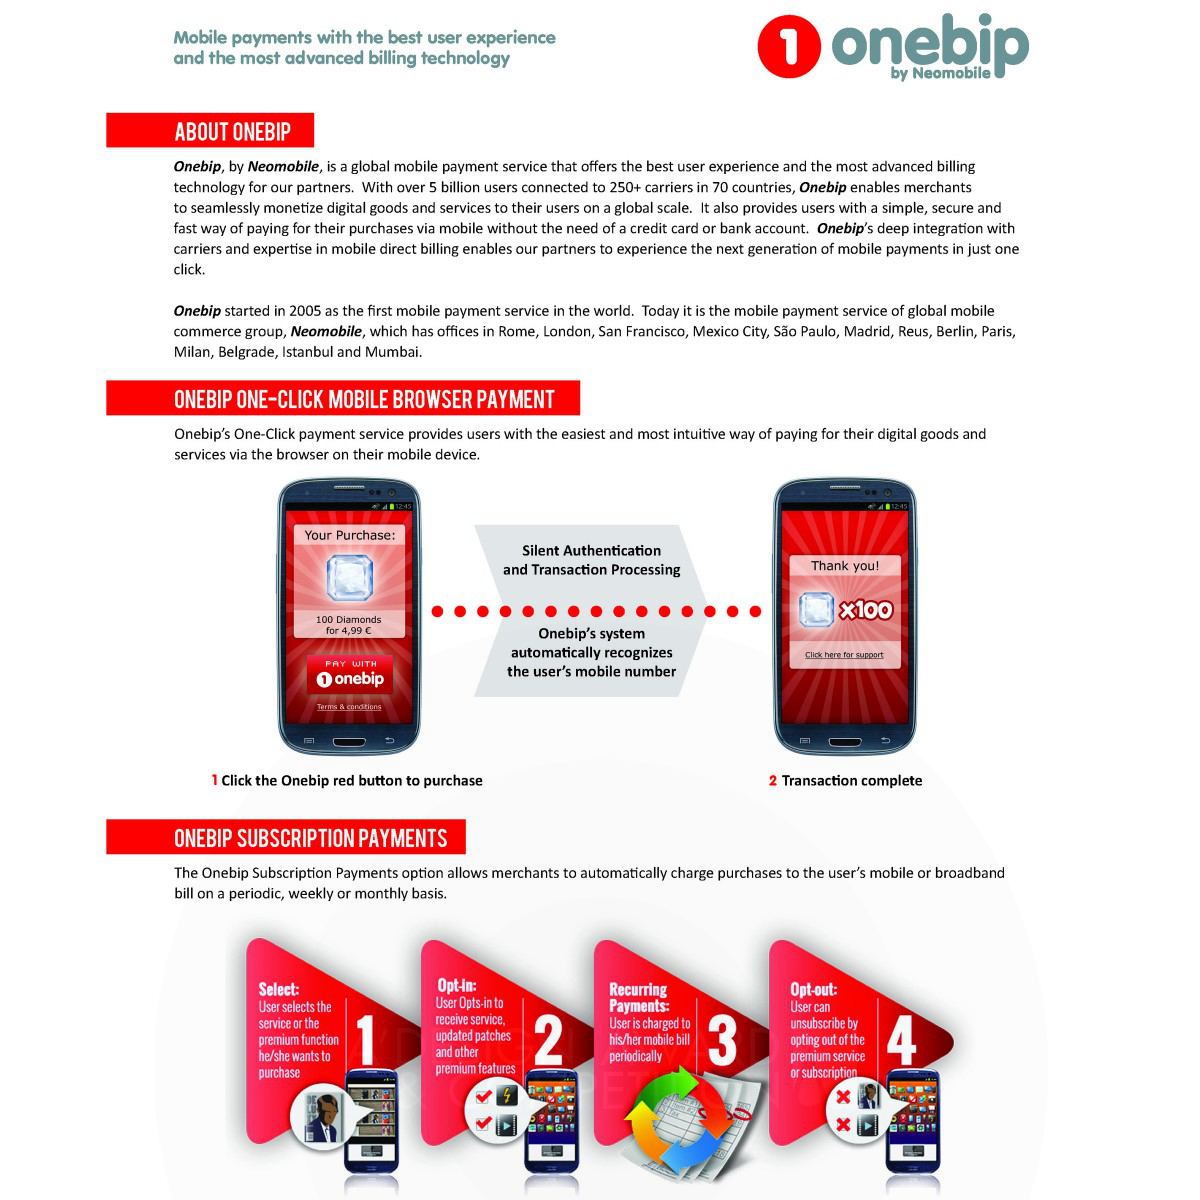 Onebip one-click mobile payment solution